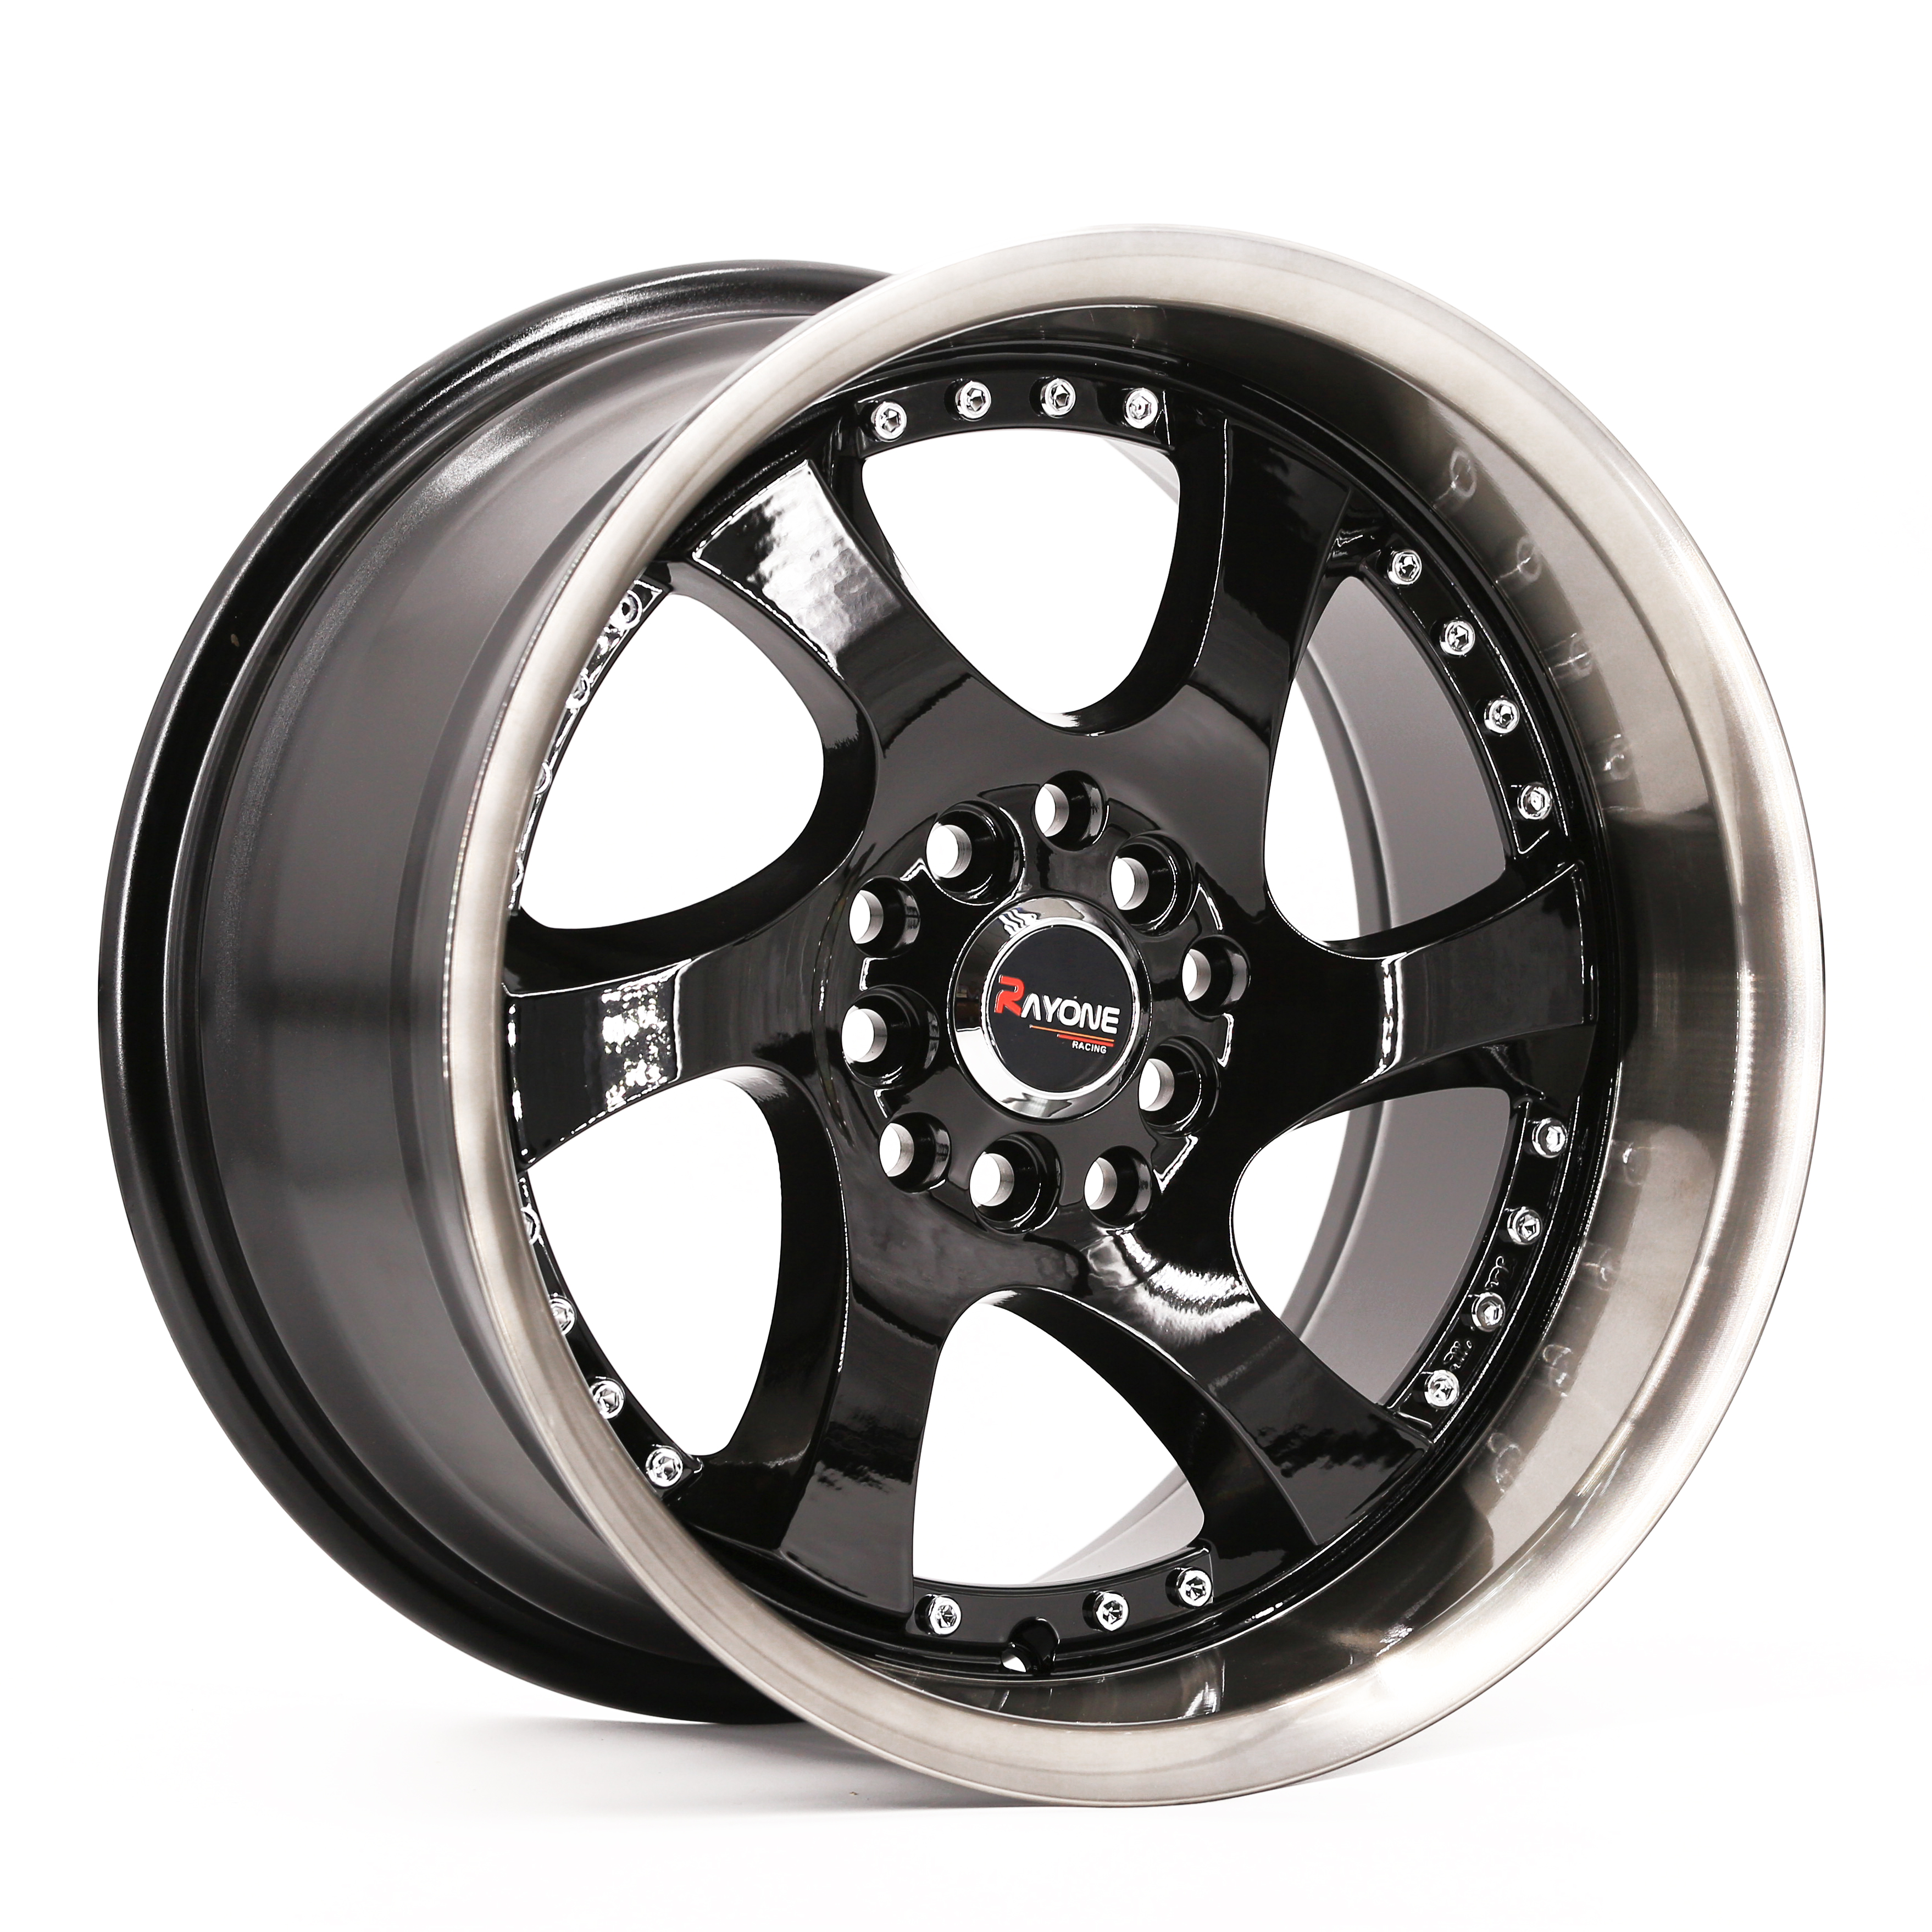 Free sample for Legacy Forged Wheels - New design Passenger 16X8.5J ET25 Car alloy wheels with Custom holes – Rayone